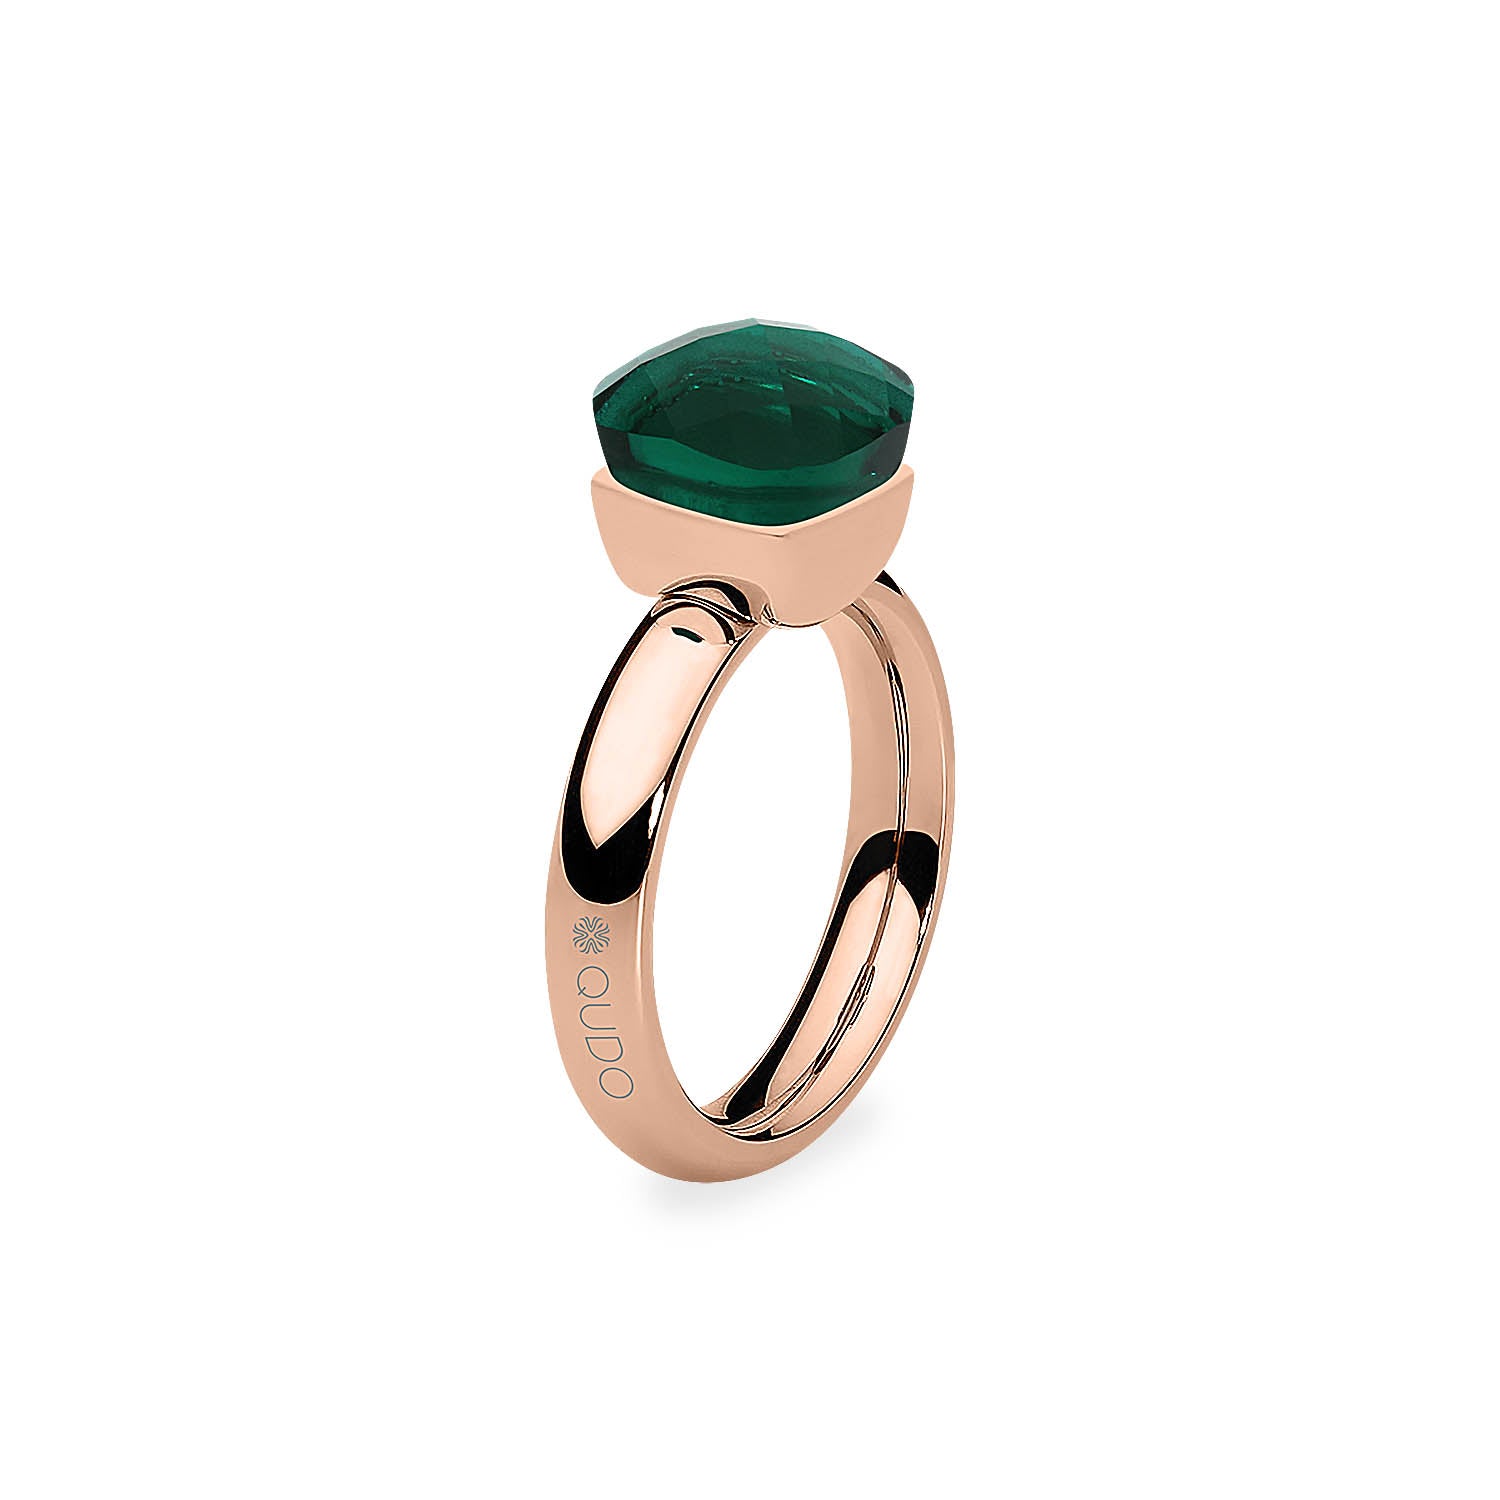 Firenze Ring - Shades of Green & Brown - Roségold